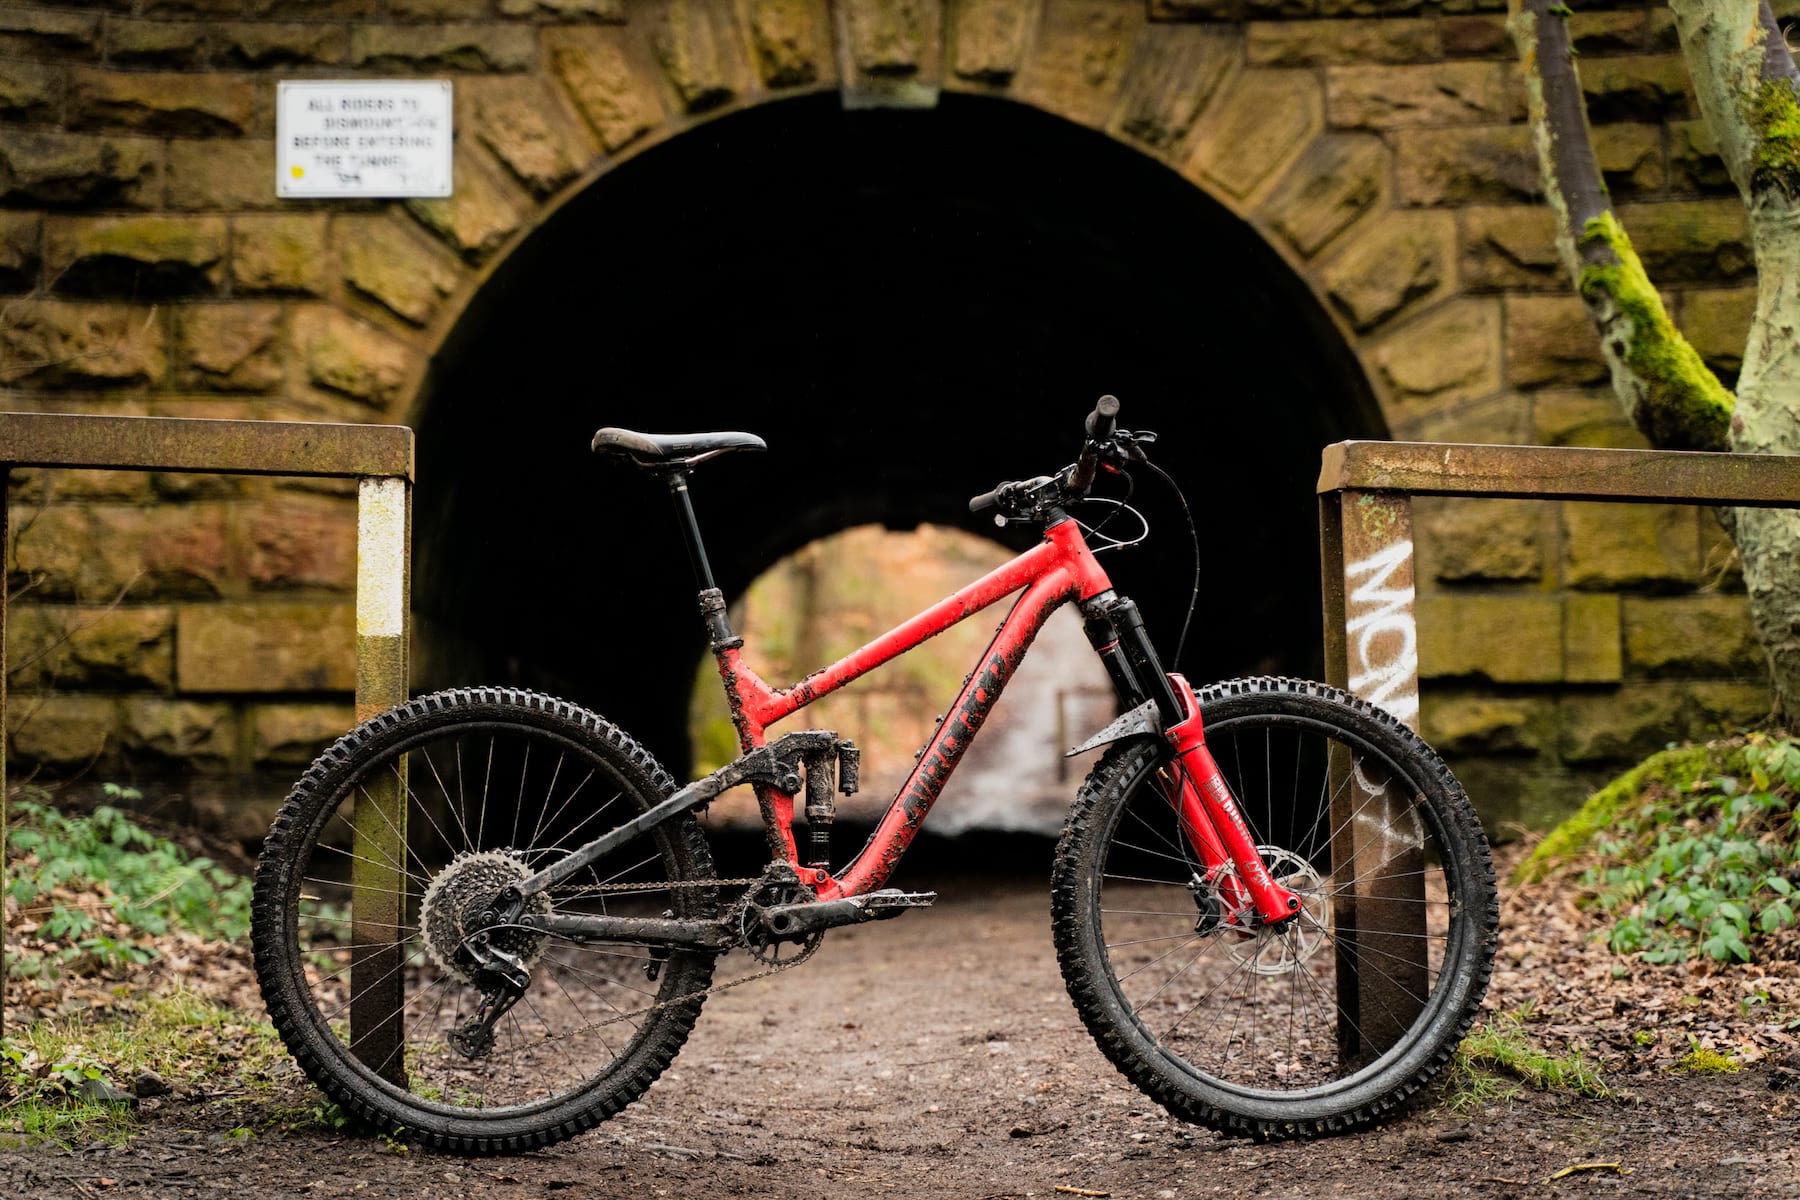 Sheffield's Airdrop Bikes Announces 2019 Airdrop Edit v3 Full